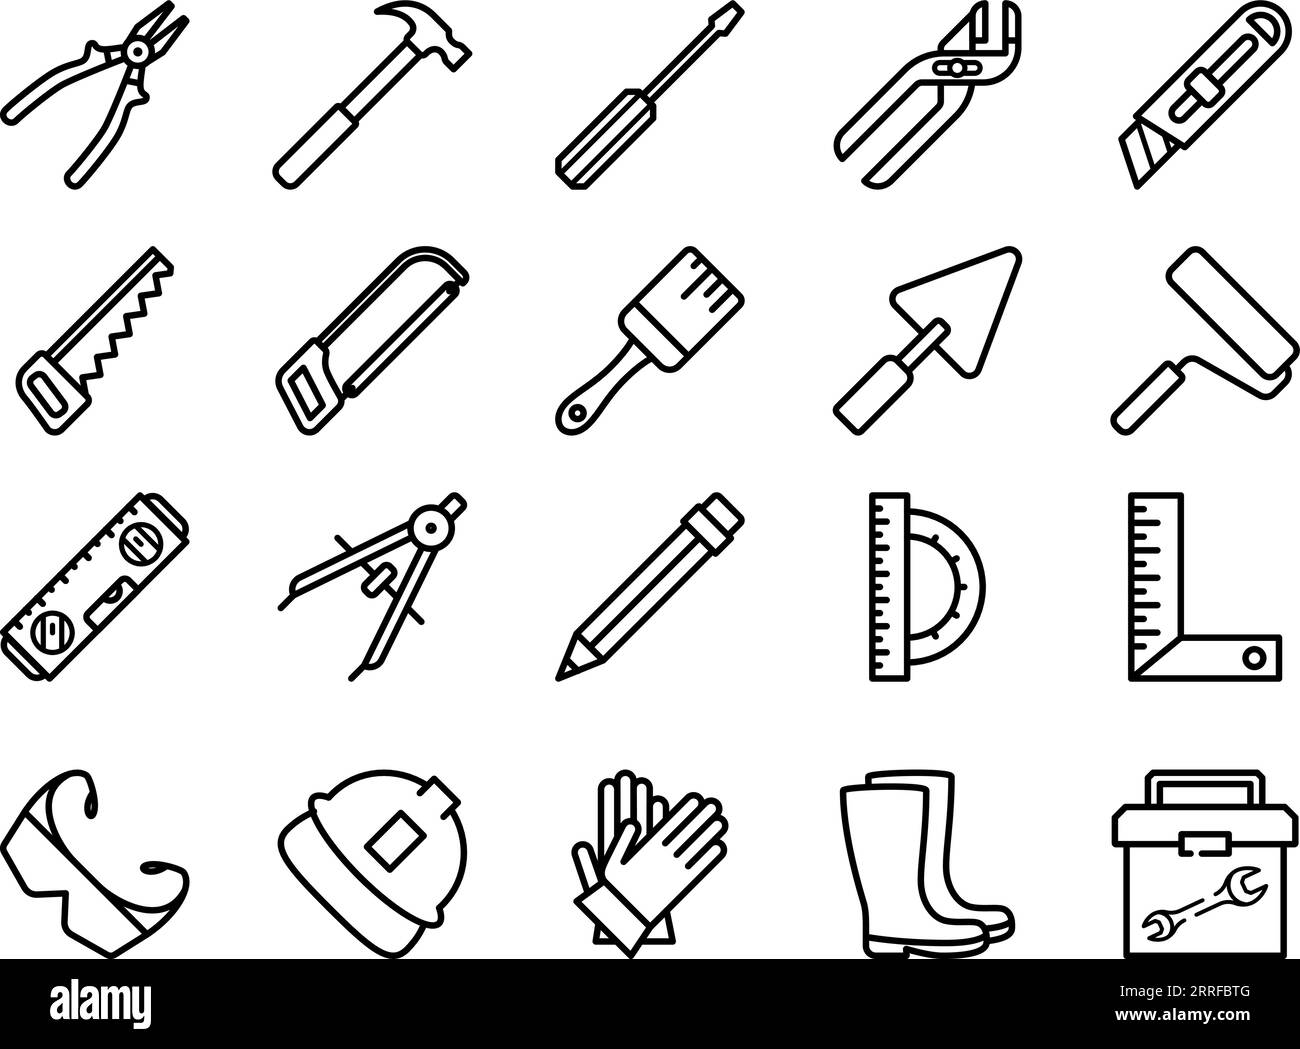 Set of tool and equipment line icons as an editable outline for web design Stock Vector